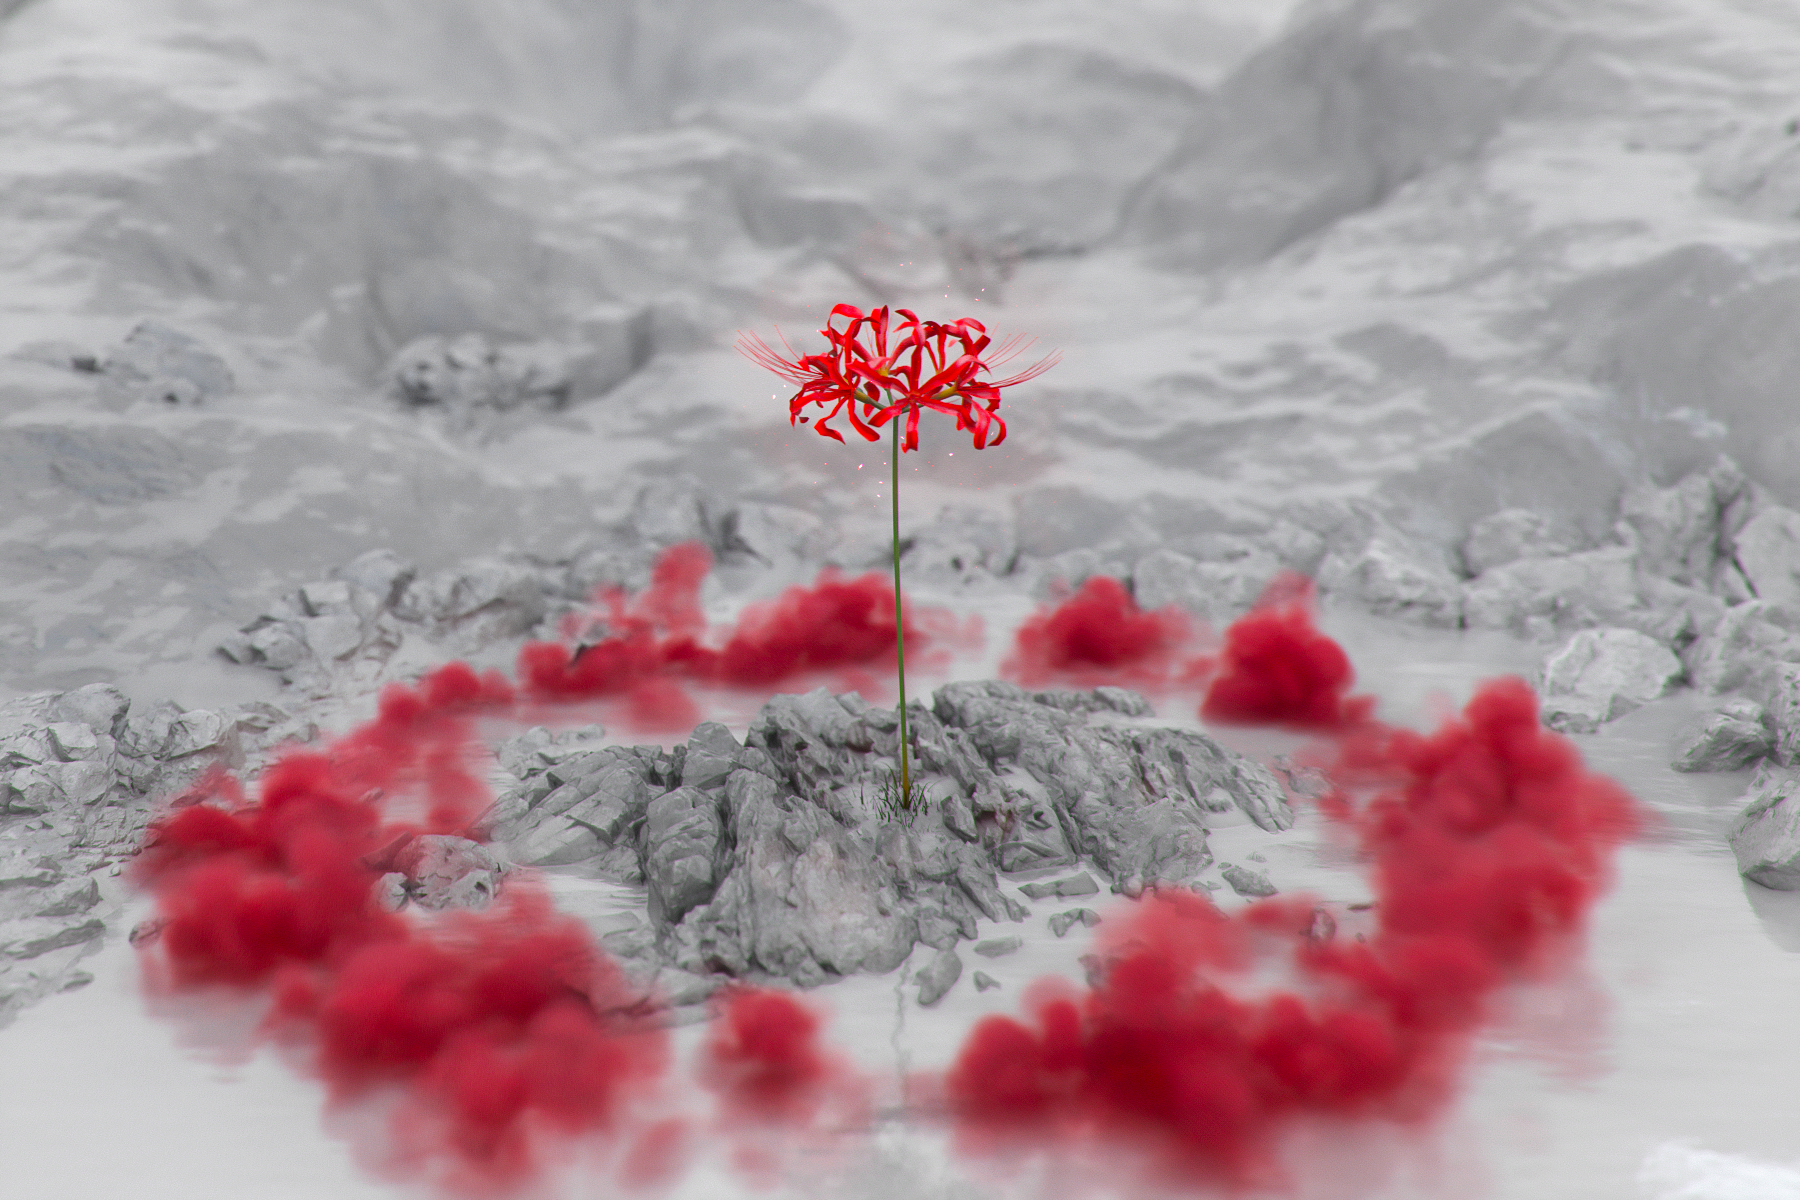 General 1800x1200 spider lilies smoke red 3D Abstract CGI digital art landscape ash particles reflection abstract flowers rocks Alex Agreto